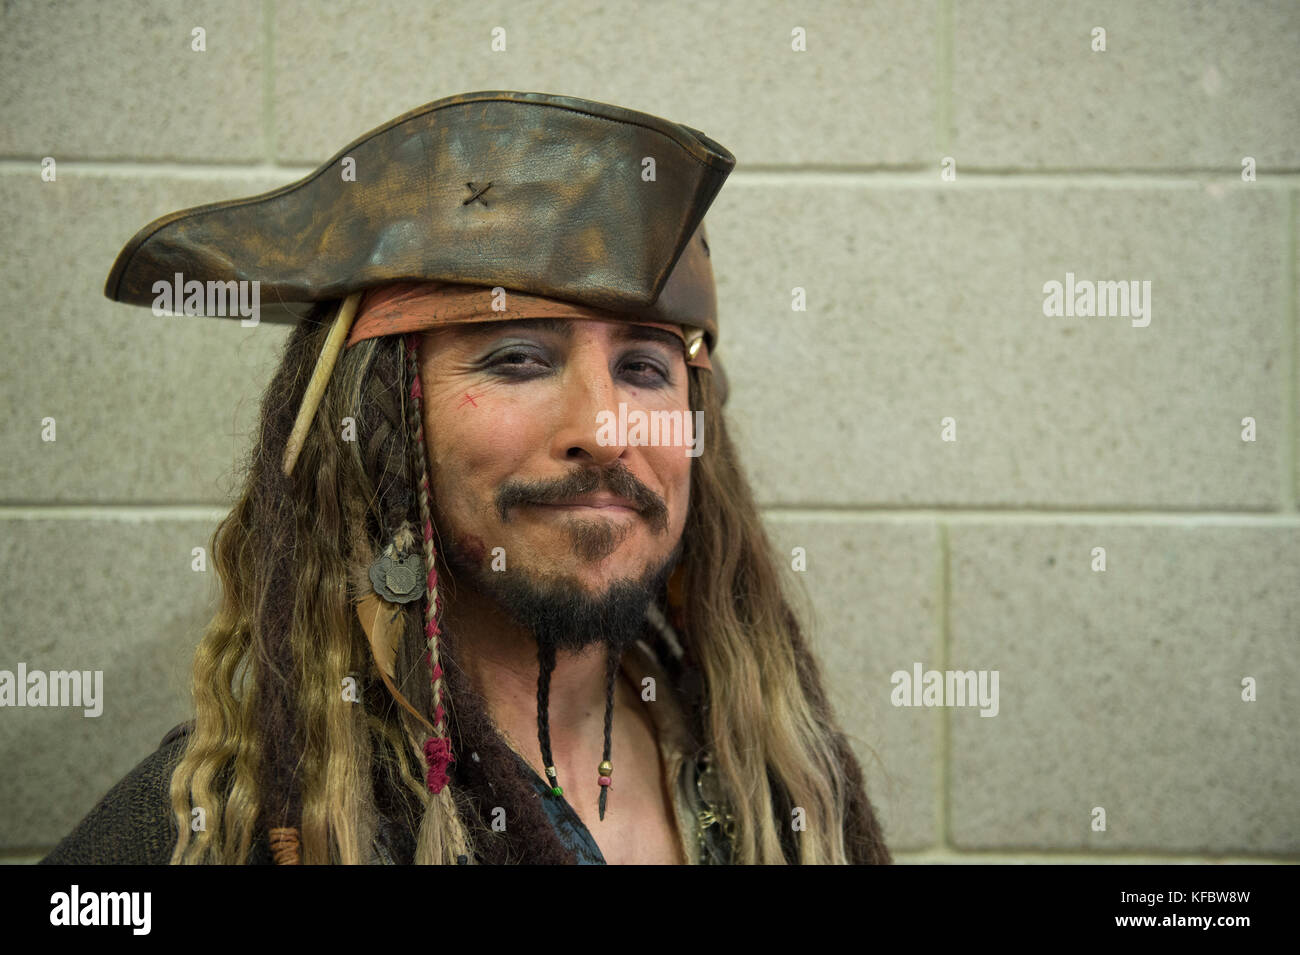 ExCel, London, UK. 27 October, 2017. Fans and cosplayers arrive for the busy first day of the MCM London Comic Con, the event runs from 27 - 29 October. Photo: Captain Jack Sparrow. Credit: Malcolm Park/Alamy Live News. Stock Photo